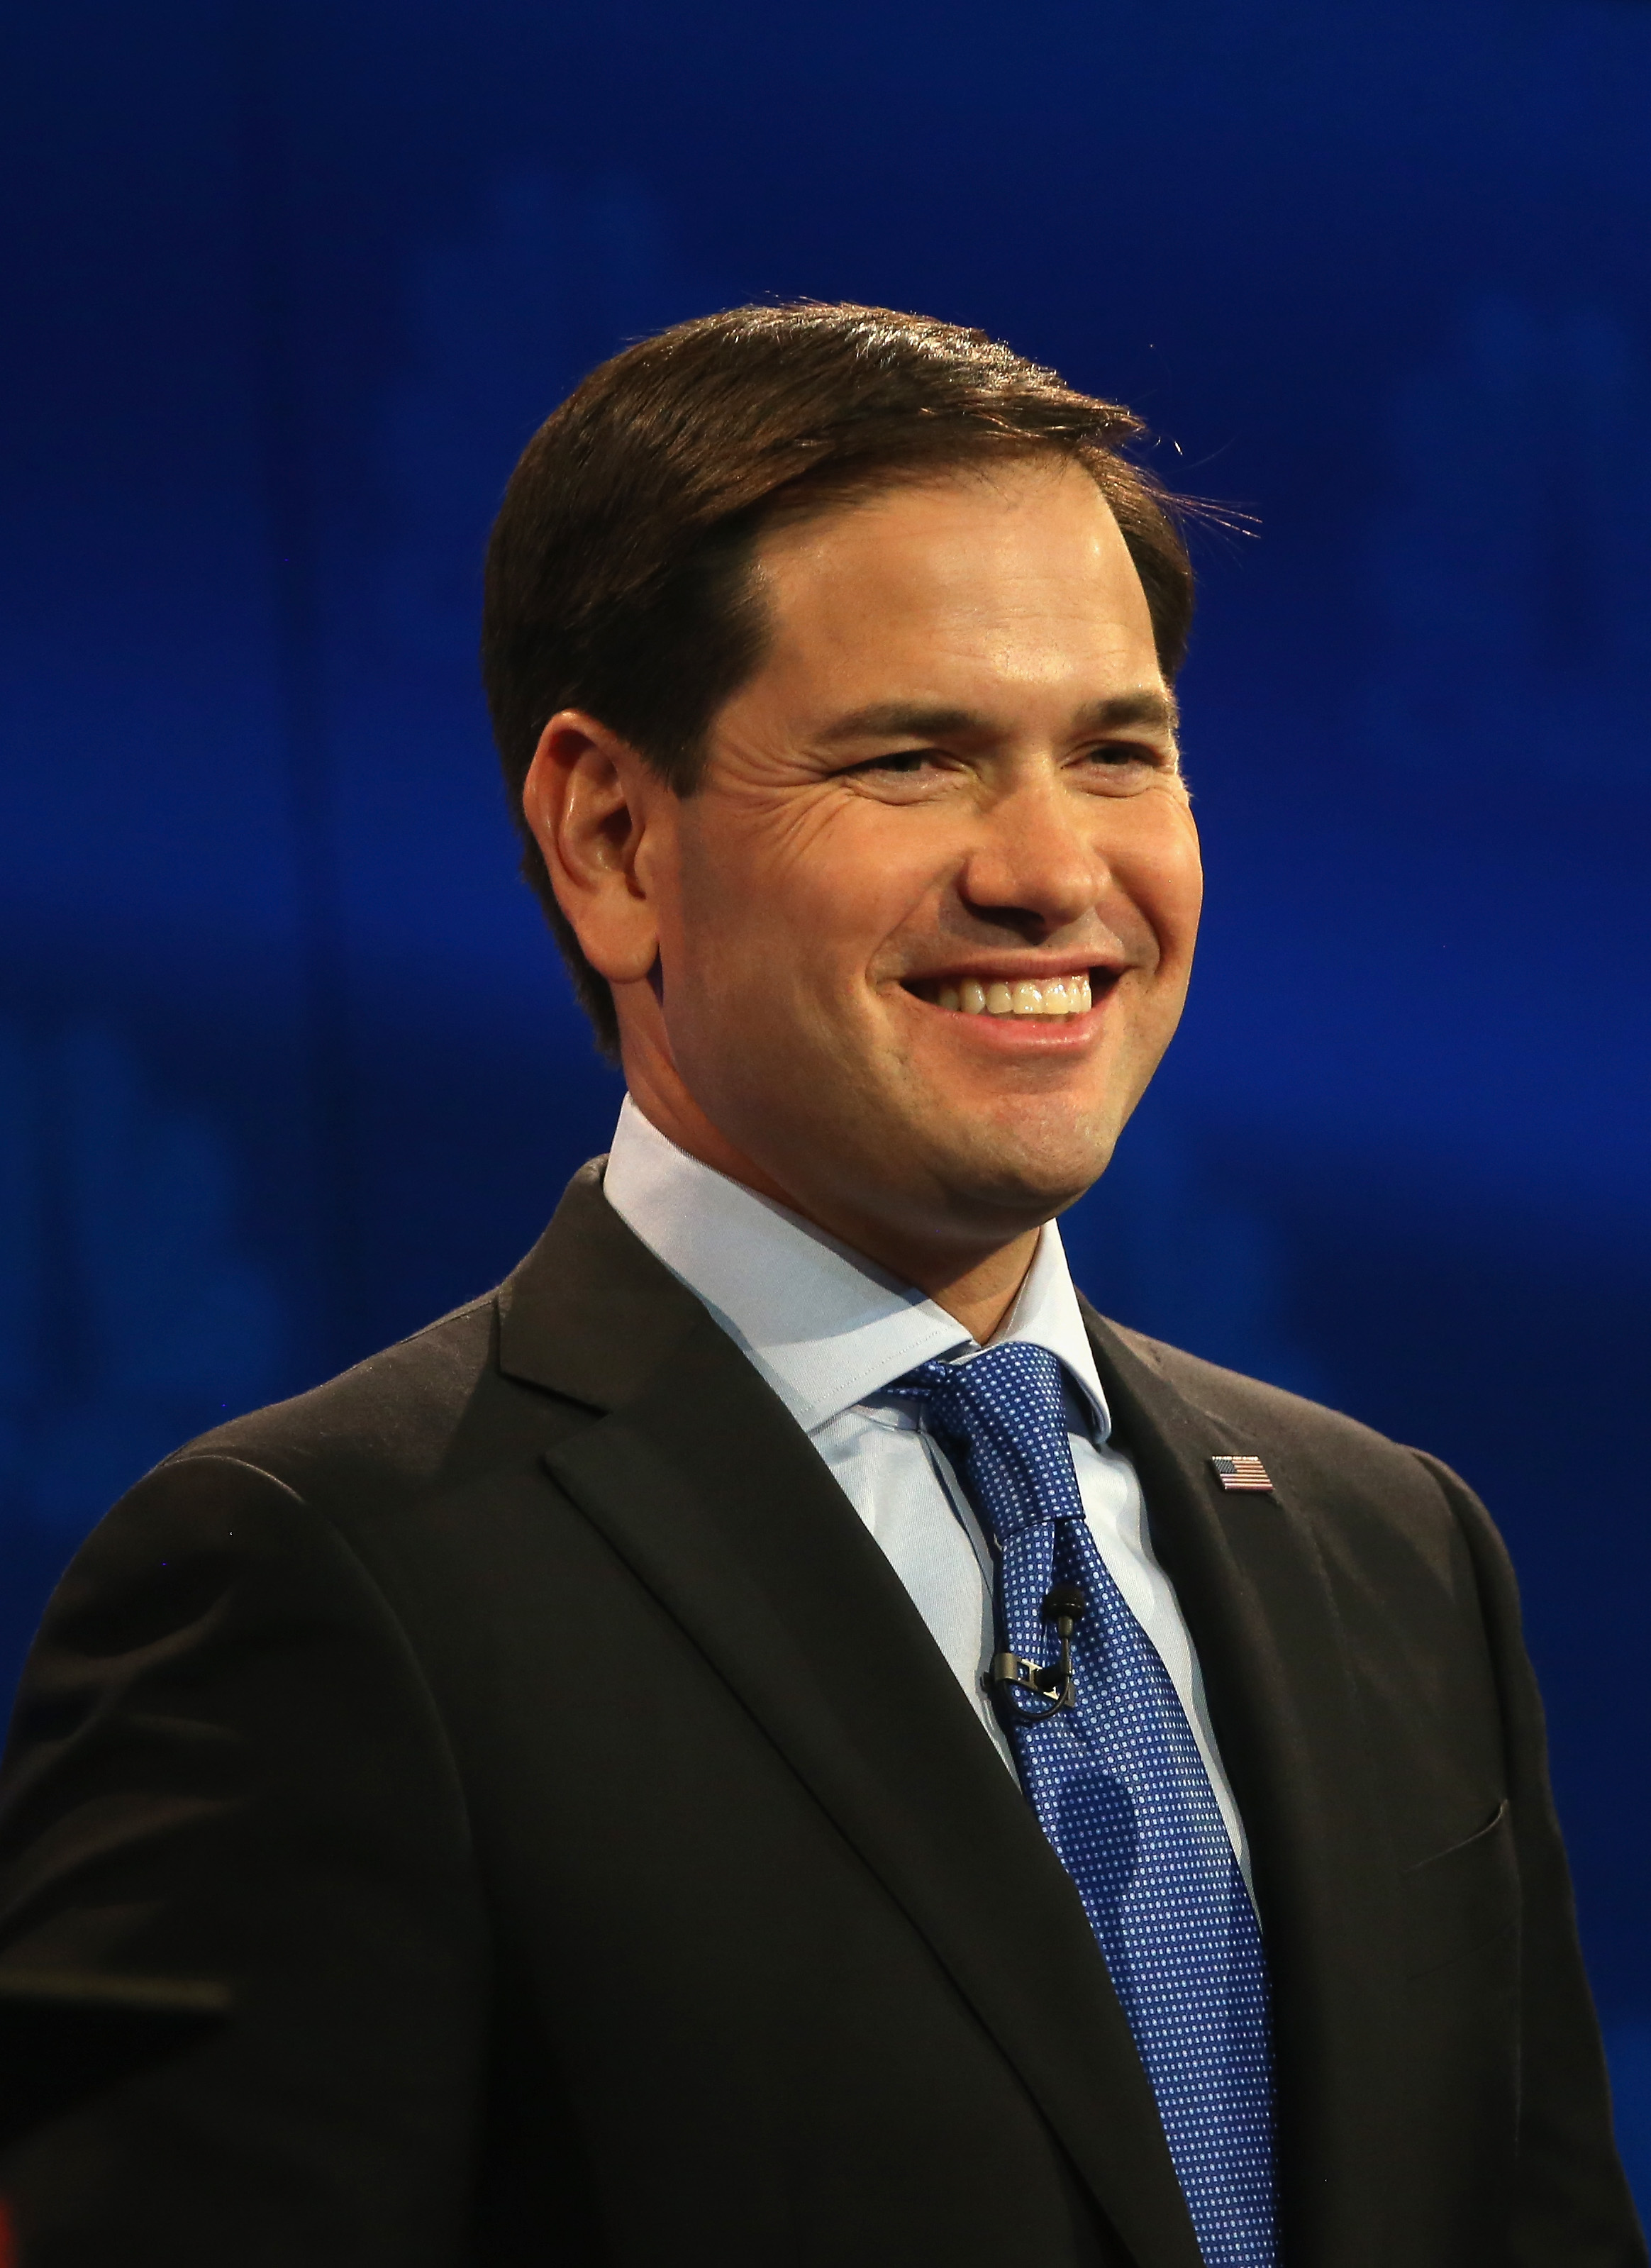 Marco Rubio’s Net Worth 5 Fast Facts You Need to Know